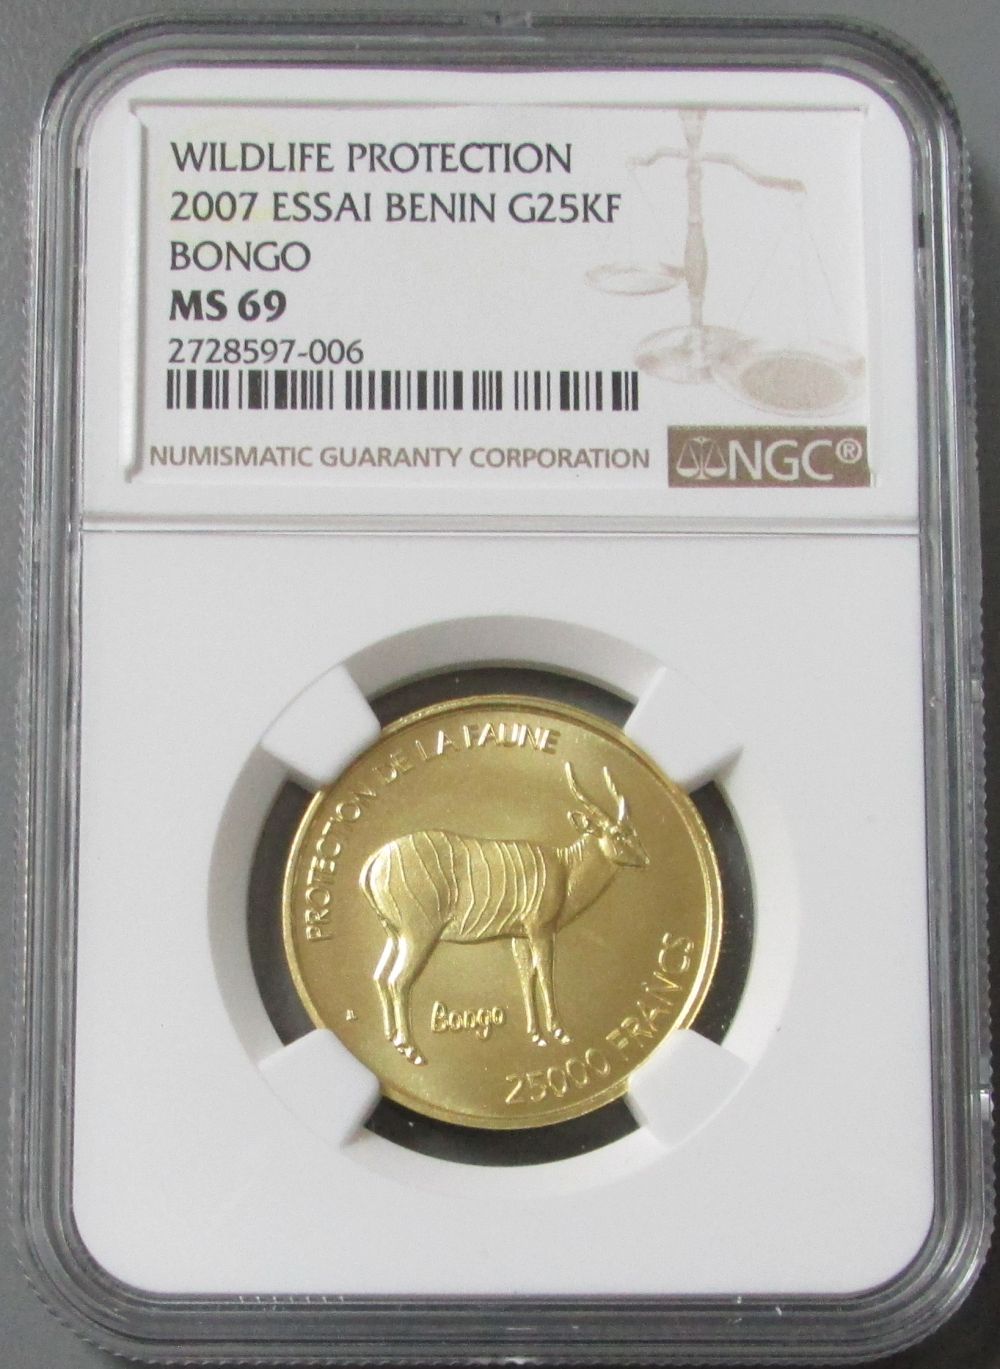 2007 GOLD ESSAI PATTERN BENIN 25,000 FRANCS WILDLIFE PROTECTION BONGO NGC MINT STATE 69 ONLY 300 MINTED